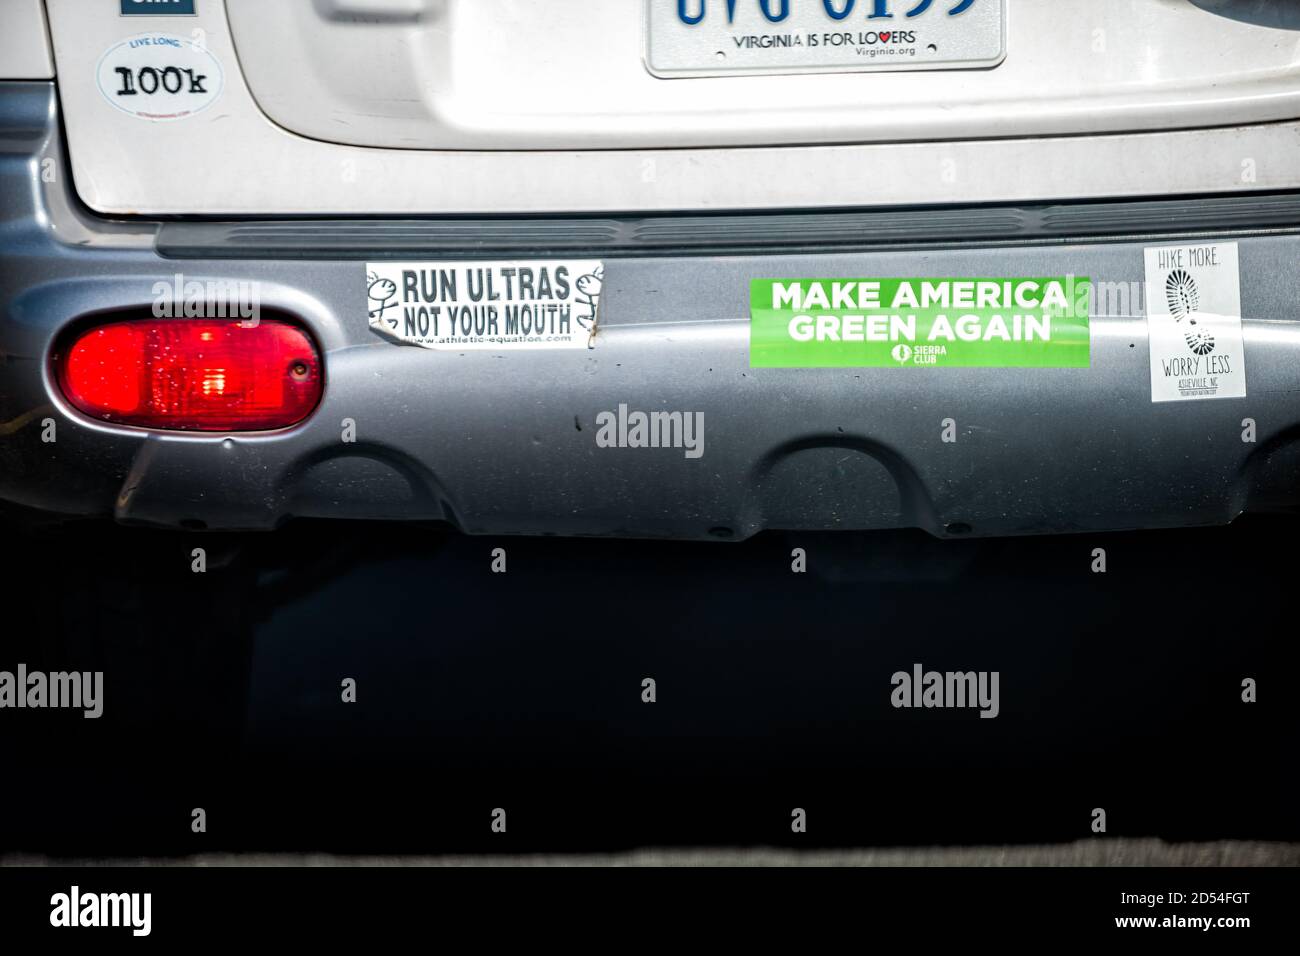 Reston, USA - August 30, 2020: Run ultras not your mouth and make America green again bumper stickers from Sierra Club on car Stock Photo